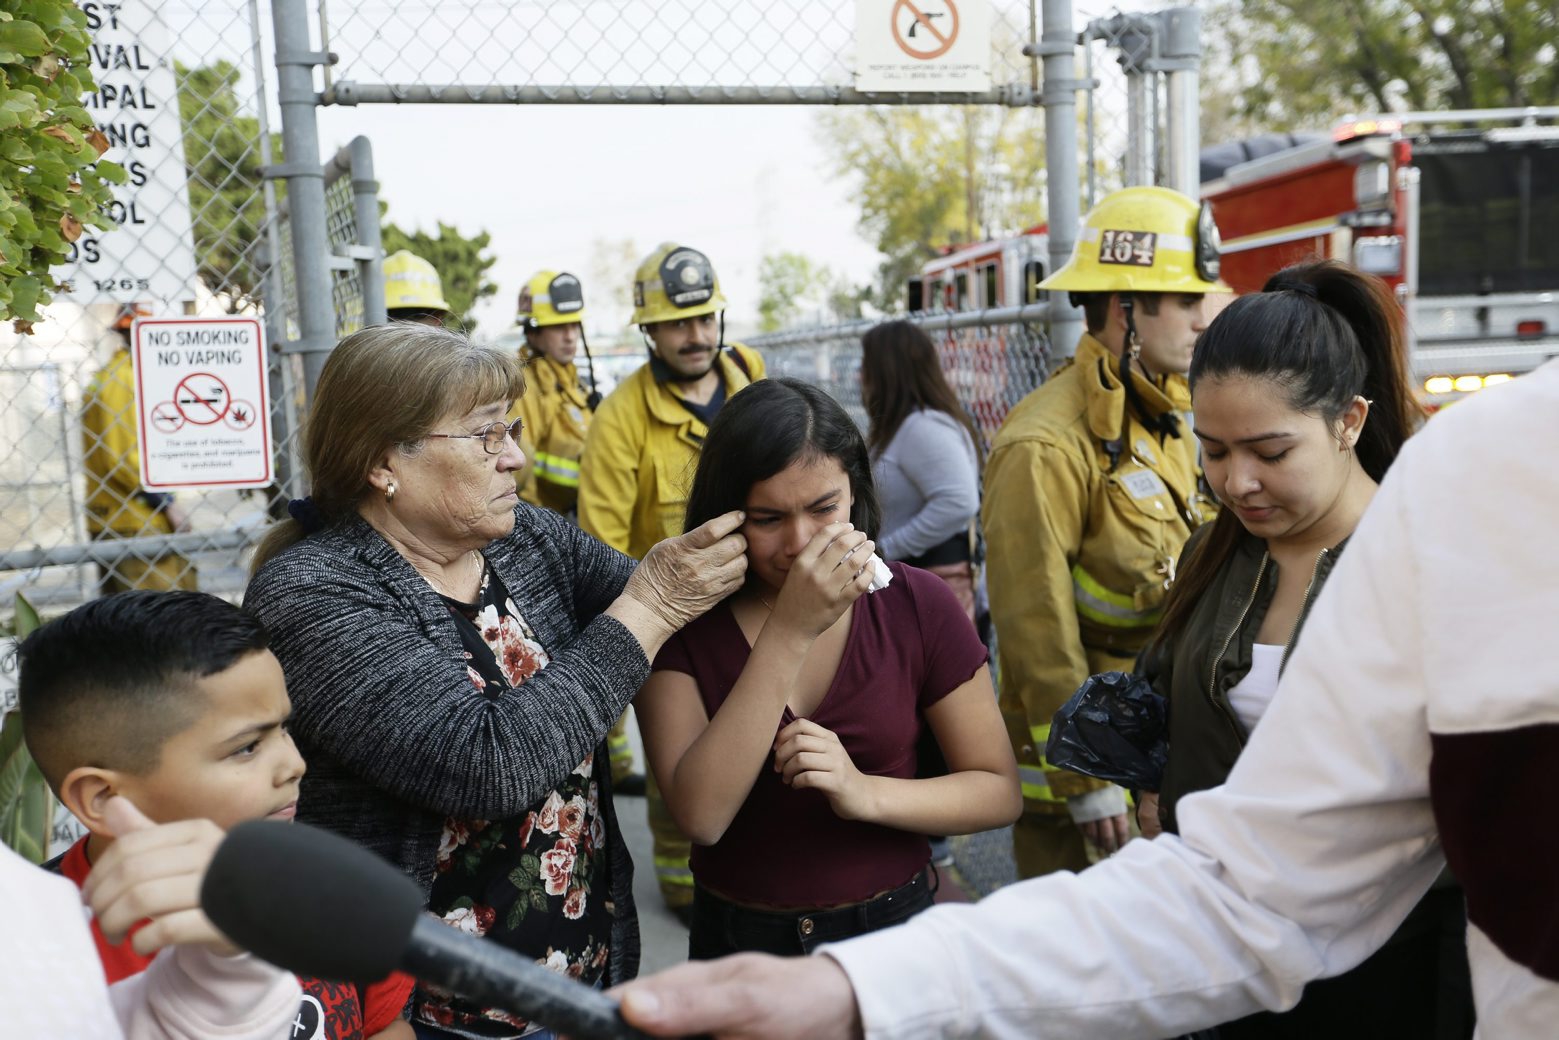 Student Marianna Torres, 11, center, cries as she evacuates Park Avenue Elementary School after jet fuel fell on the school in Cudahy, Calif., Tuesday, Jan. 14, 2020. Jet fuel dumped by an aircraft returning to Los Angeles International Airport fell onto the school playground where children were playing Tuesday, fire officials said. The Los Angeles County Fire Department said firefighters assessed over a dozen children and several adults who complained of minor injuries and none needed to be taken to a hospital. (AP Photo/Damian Dovarganes)
Teresa Santoya,Marianna Torres,Pamela Amador Aircraft Fuel Dump